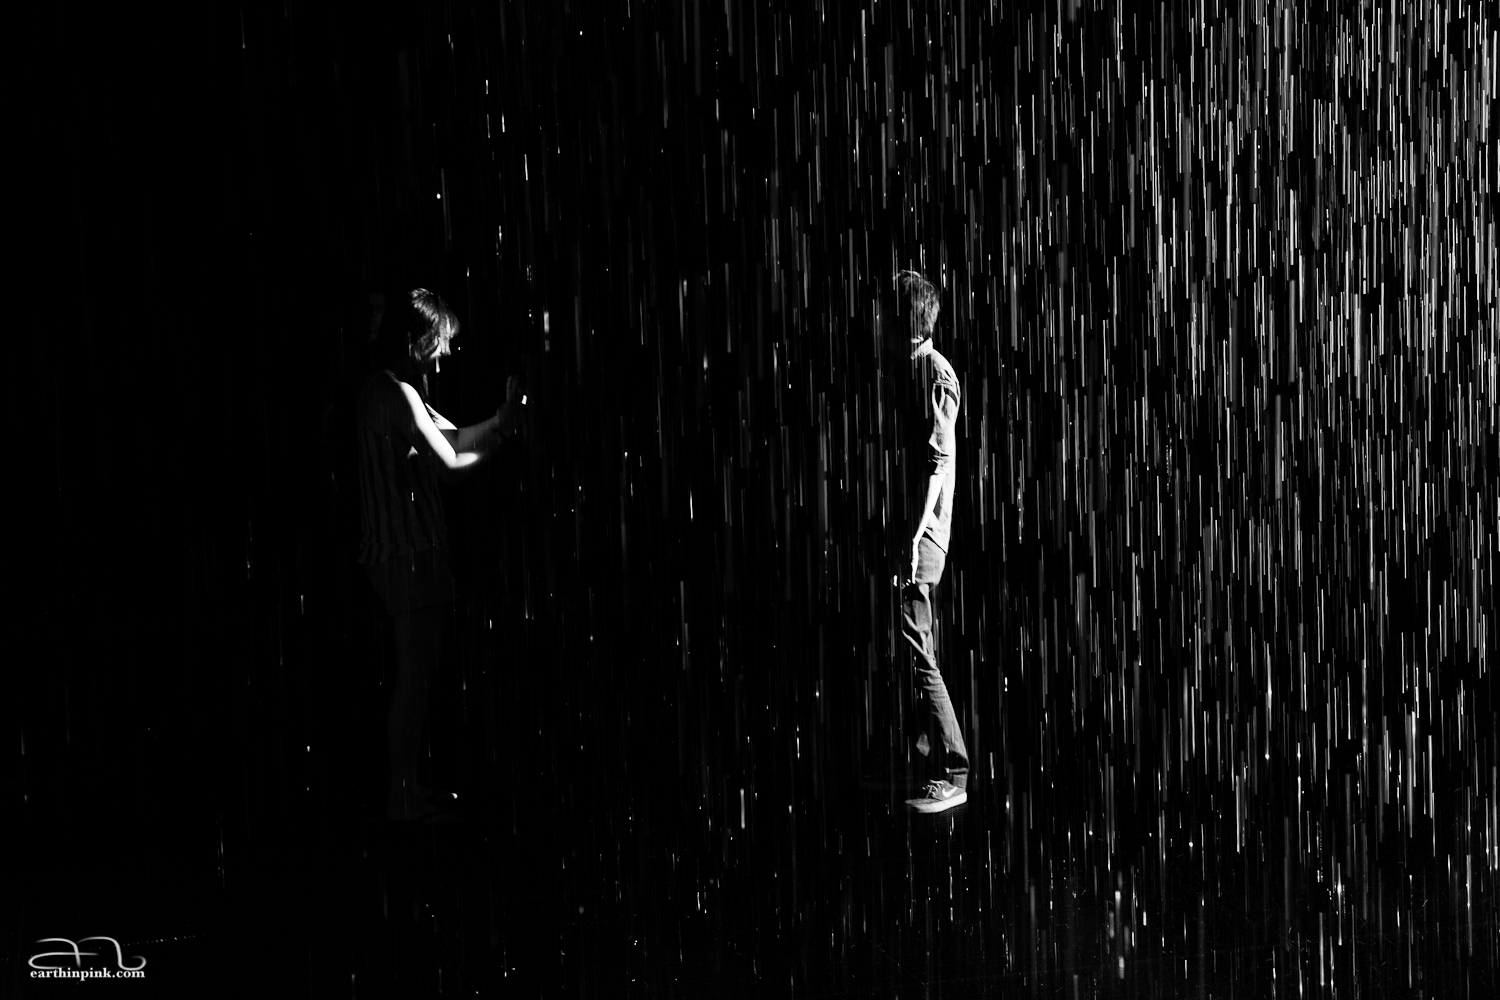 The RainRoom temporary exhibition at the Museum of Modern Art in New York